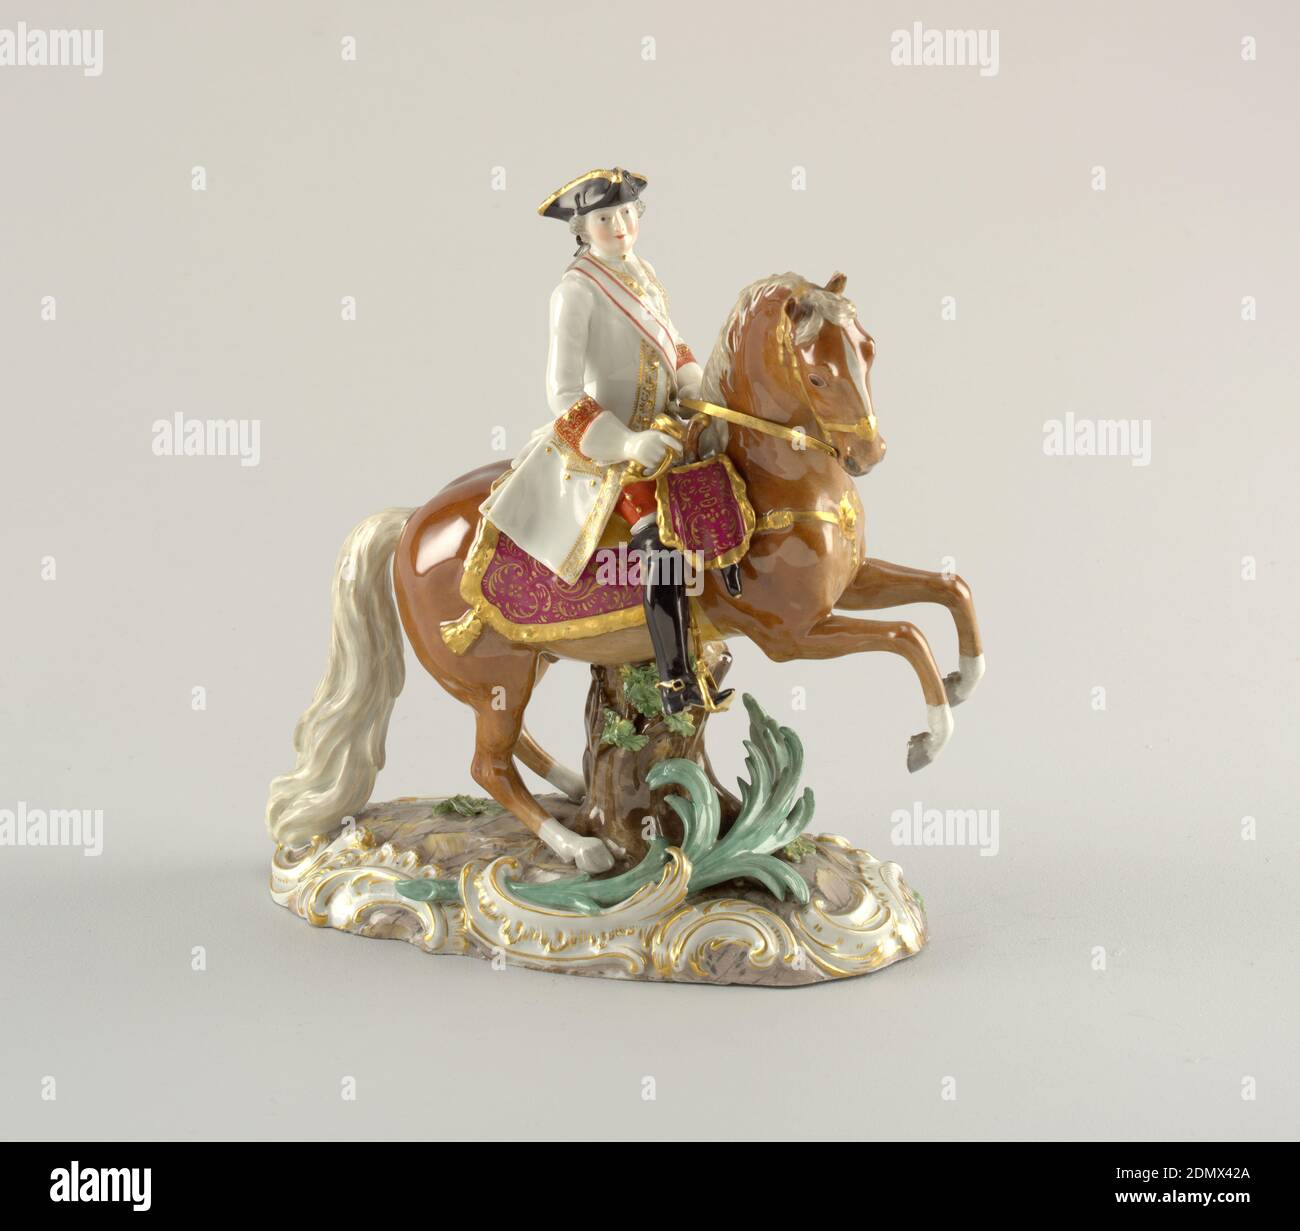 Figure of an Officer on Horseback, Meissen Porcelain Manufactory, German, active from 1710 to the present, hard paste porcelain, vitreous enamel, gold, Officer on horseback. On oval base painted to simulate stone, framed by gilt scrolls. A prancing sorrel supported by tree trunk. An officer on white, gold edged coat and black tricorne in saddle, holding sword hilt in front and reigns in left hand., Germany, mid- 19th century, ceramics, Decorative Arts, figure, figure Stock Photo